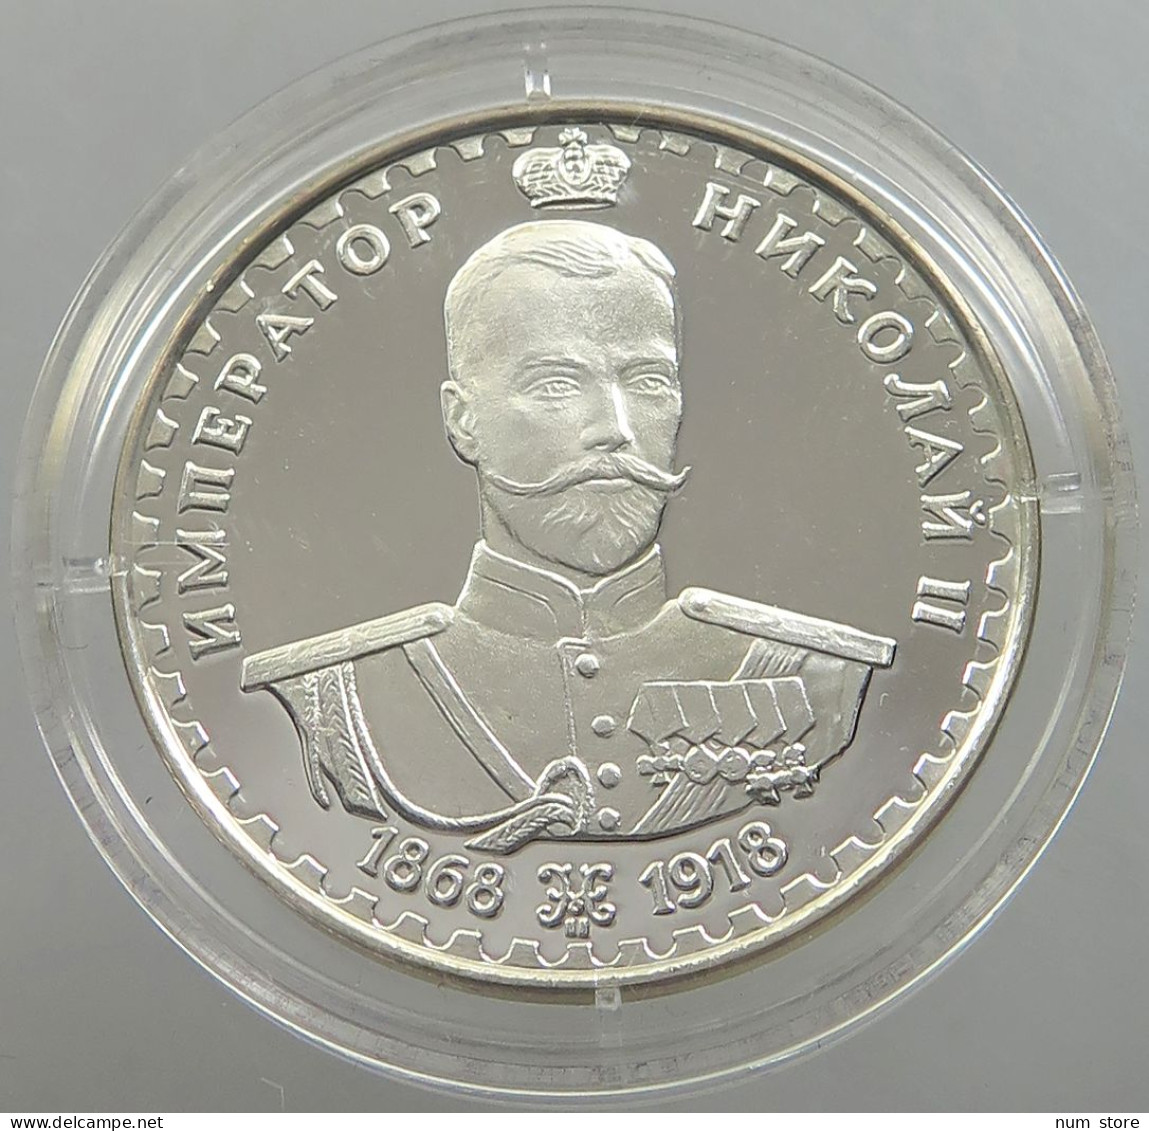 RUSSIA SILVER MEDAL NIKOLAUS 1868-1918 PROOF 10G #sm14 0189 - Russland